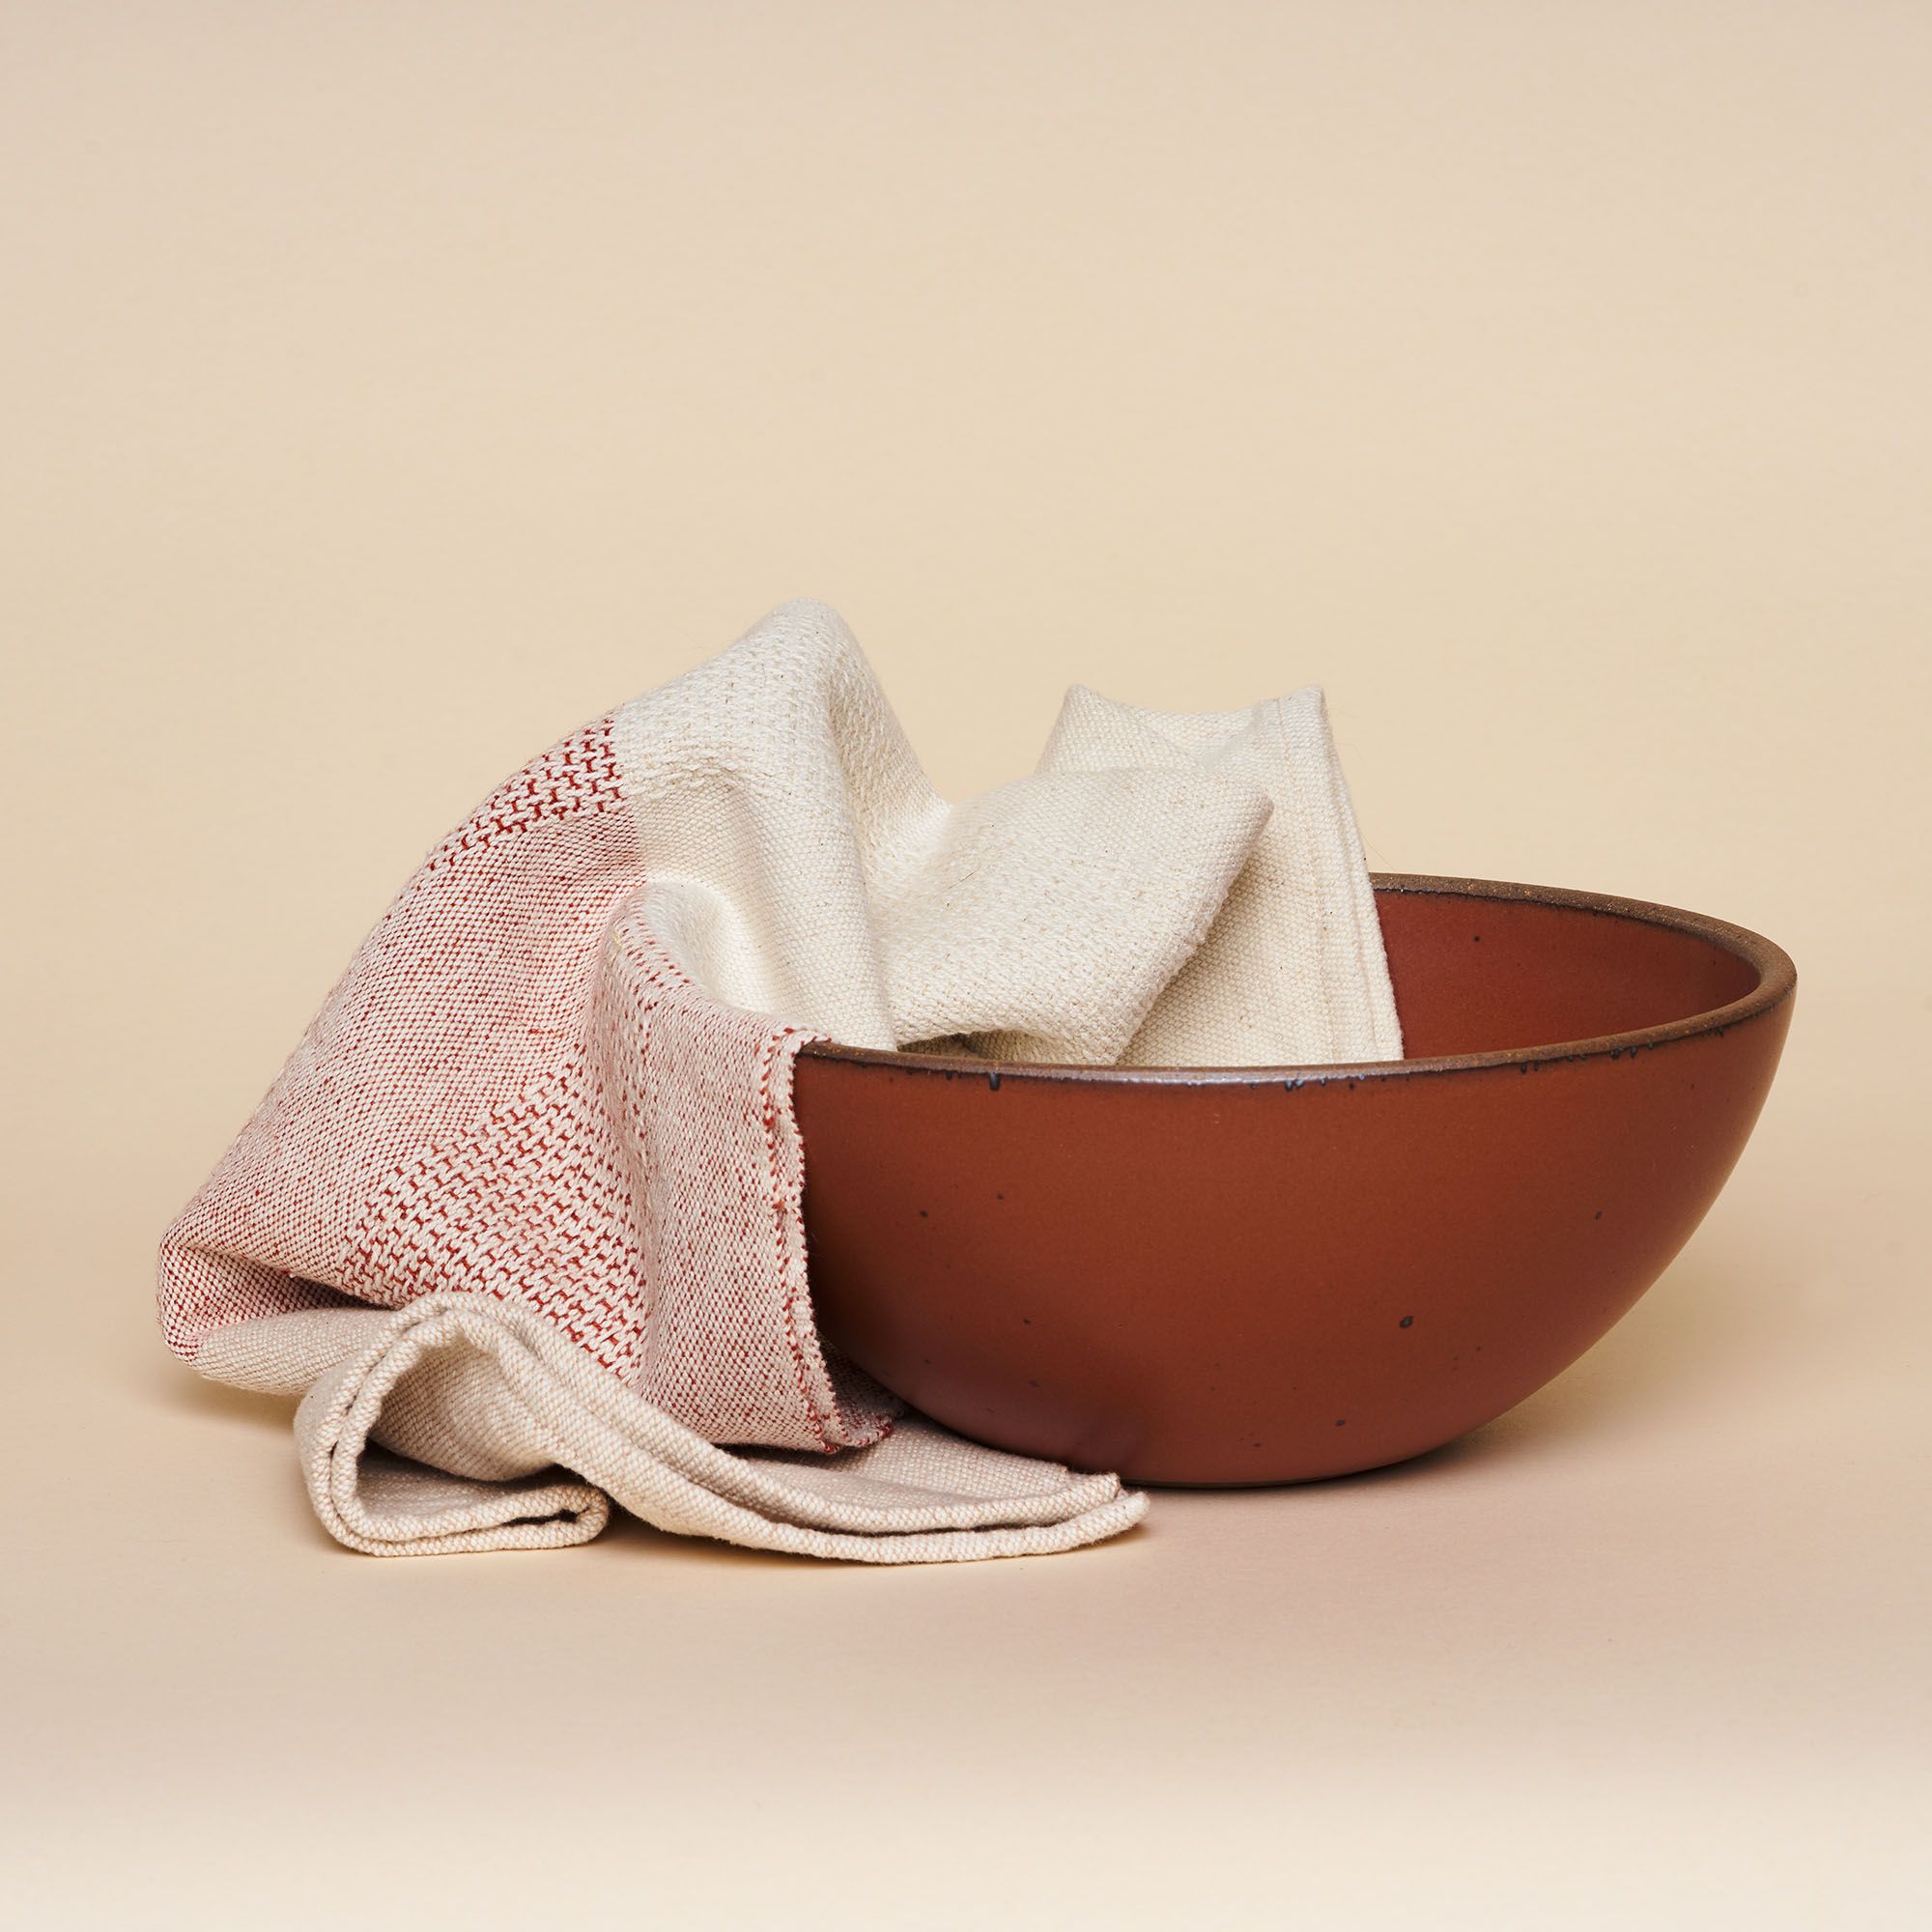 A half-red, half-natural woven tea towel placed whimsically in a matching earthy red stoneware pottery bowl.